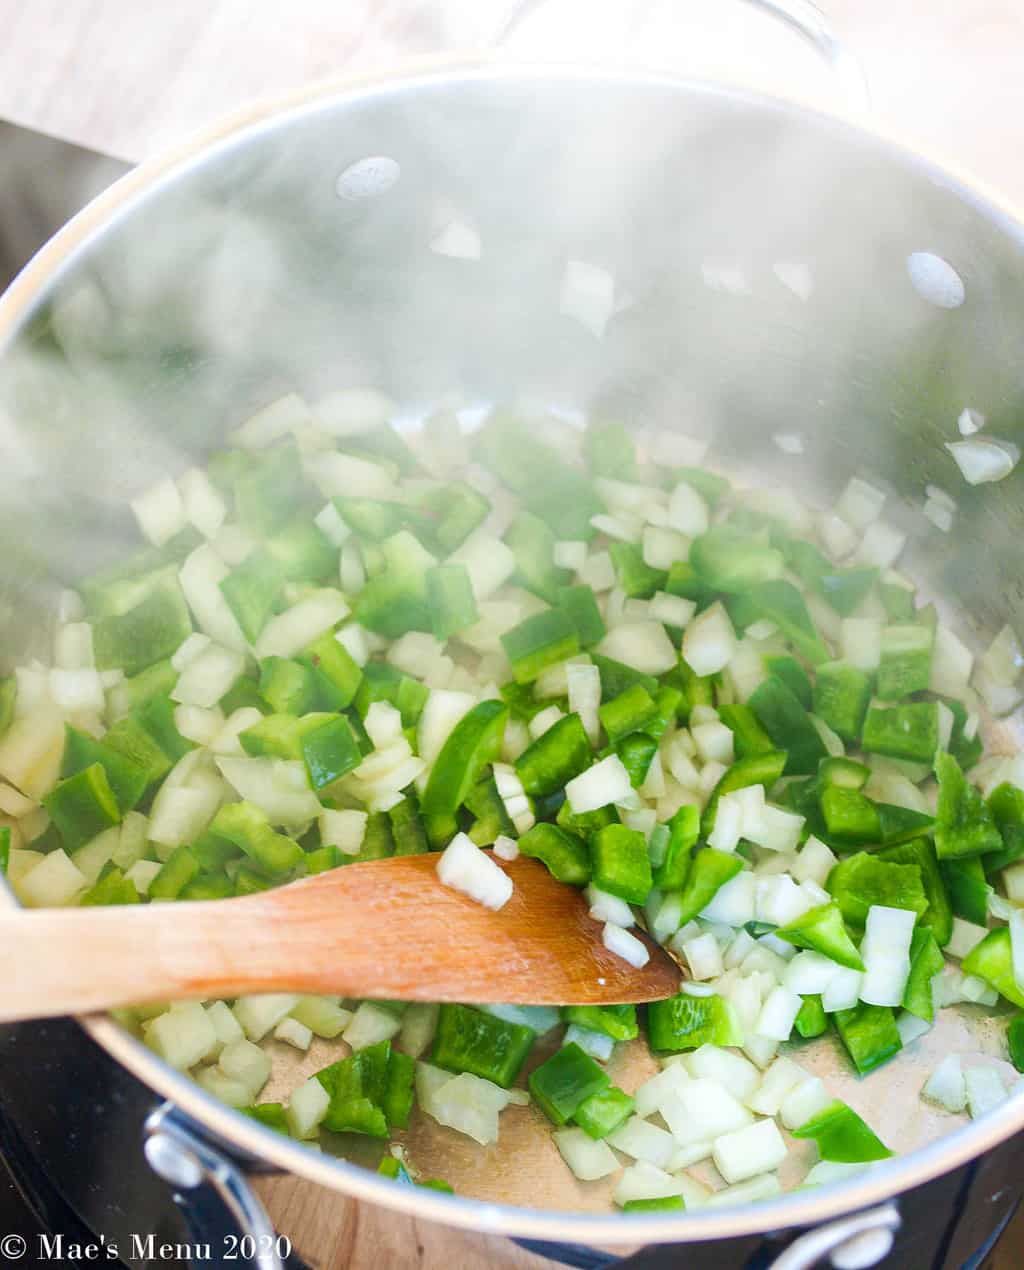 Onions and green peppers sauteing on the stovetop